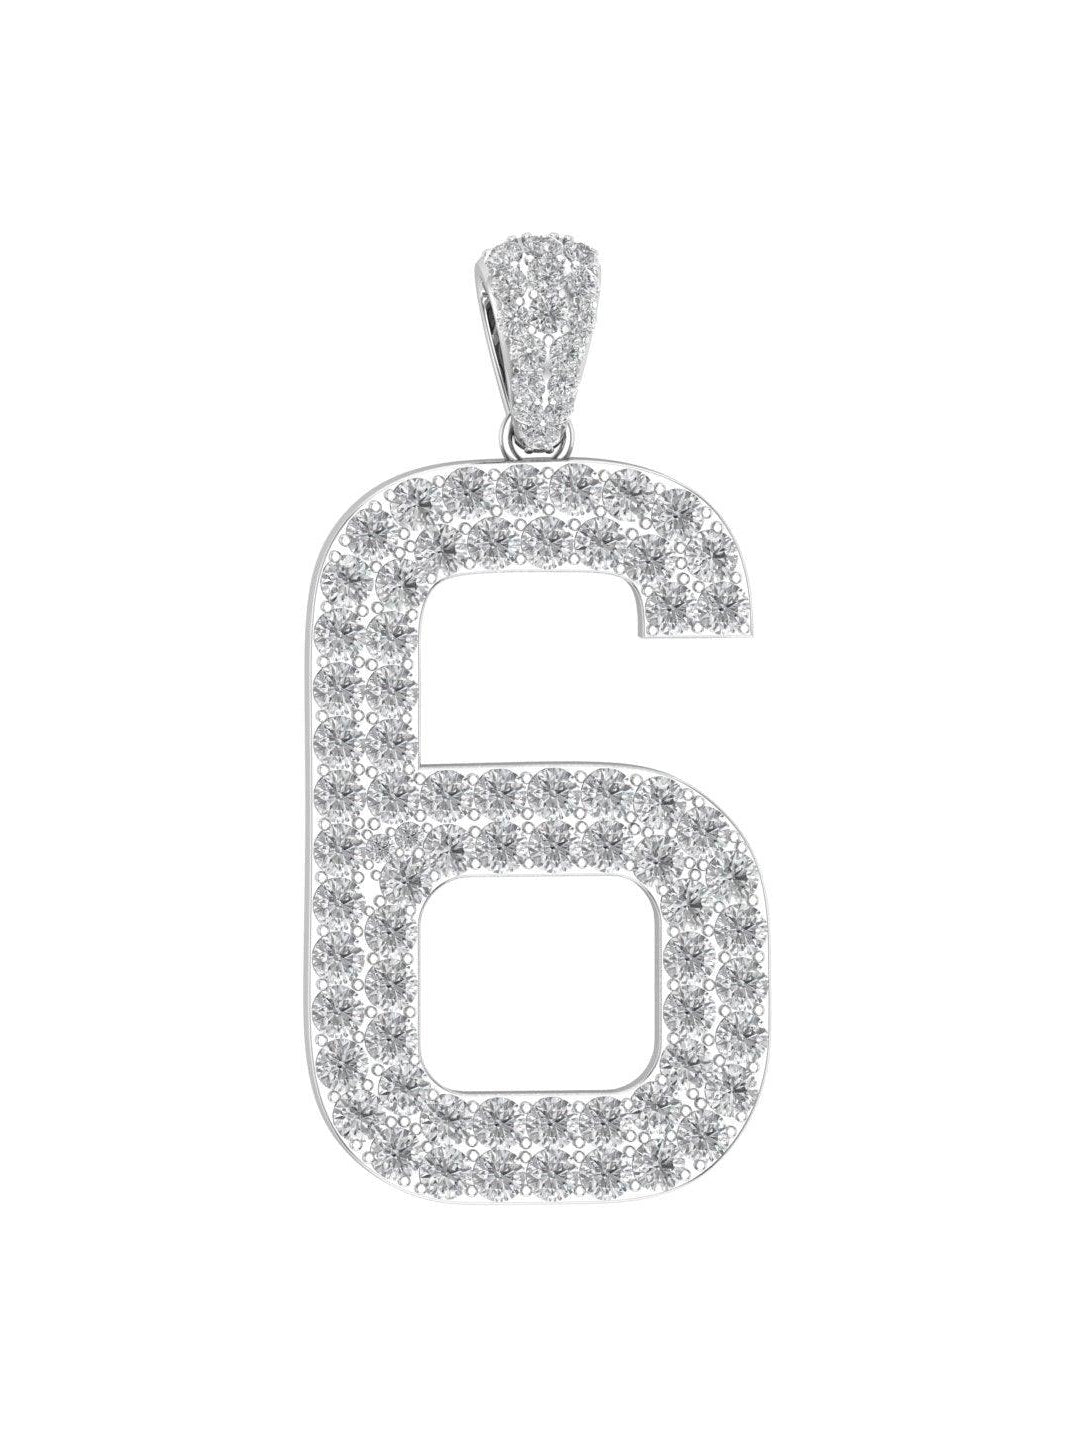 White Gold Color Pendant in the Shape of 6 Made of 925 Sterling Silver Material with 20 Inch Long Silver Chain